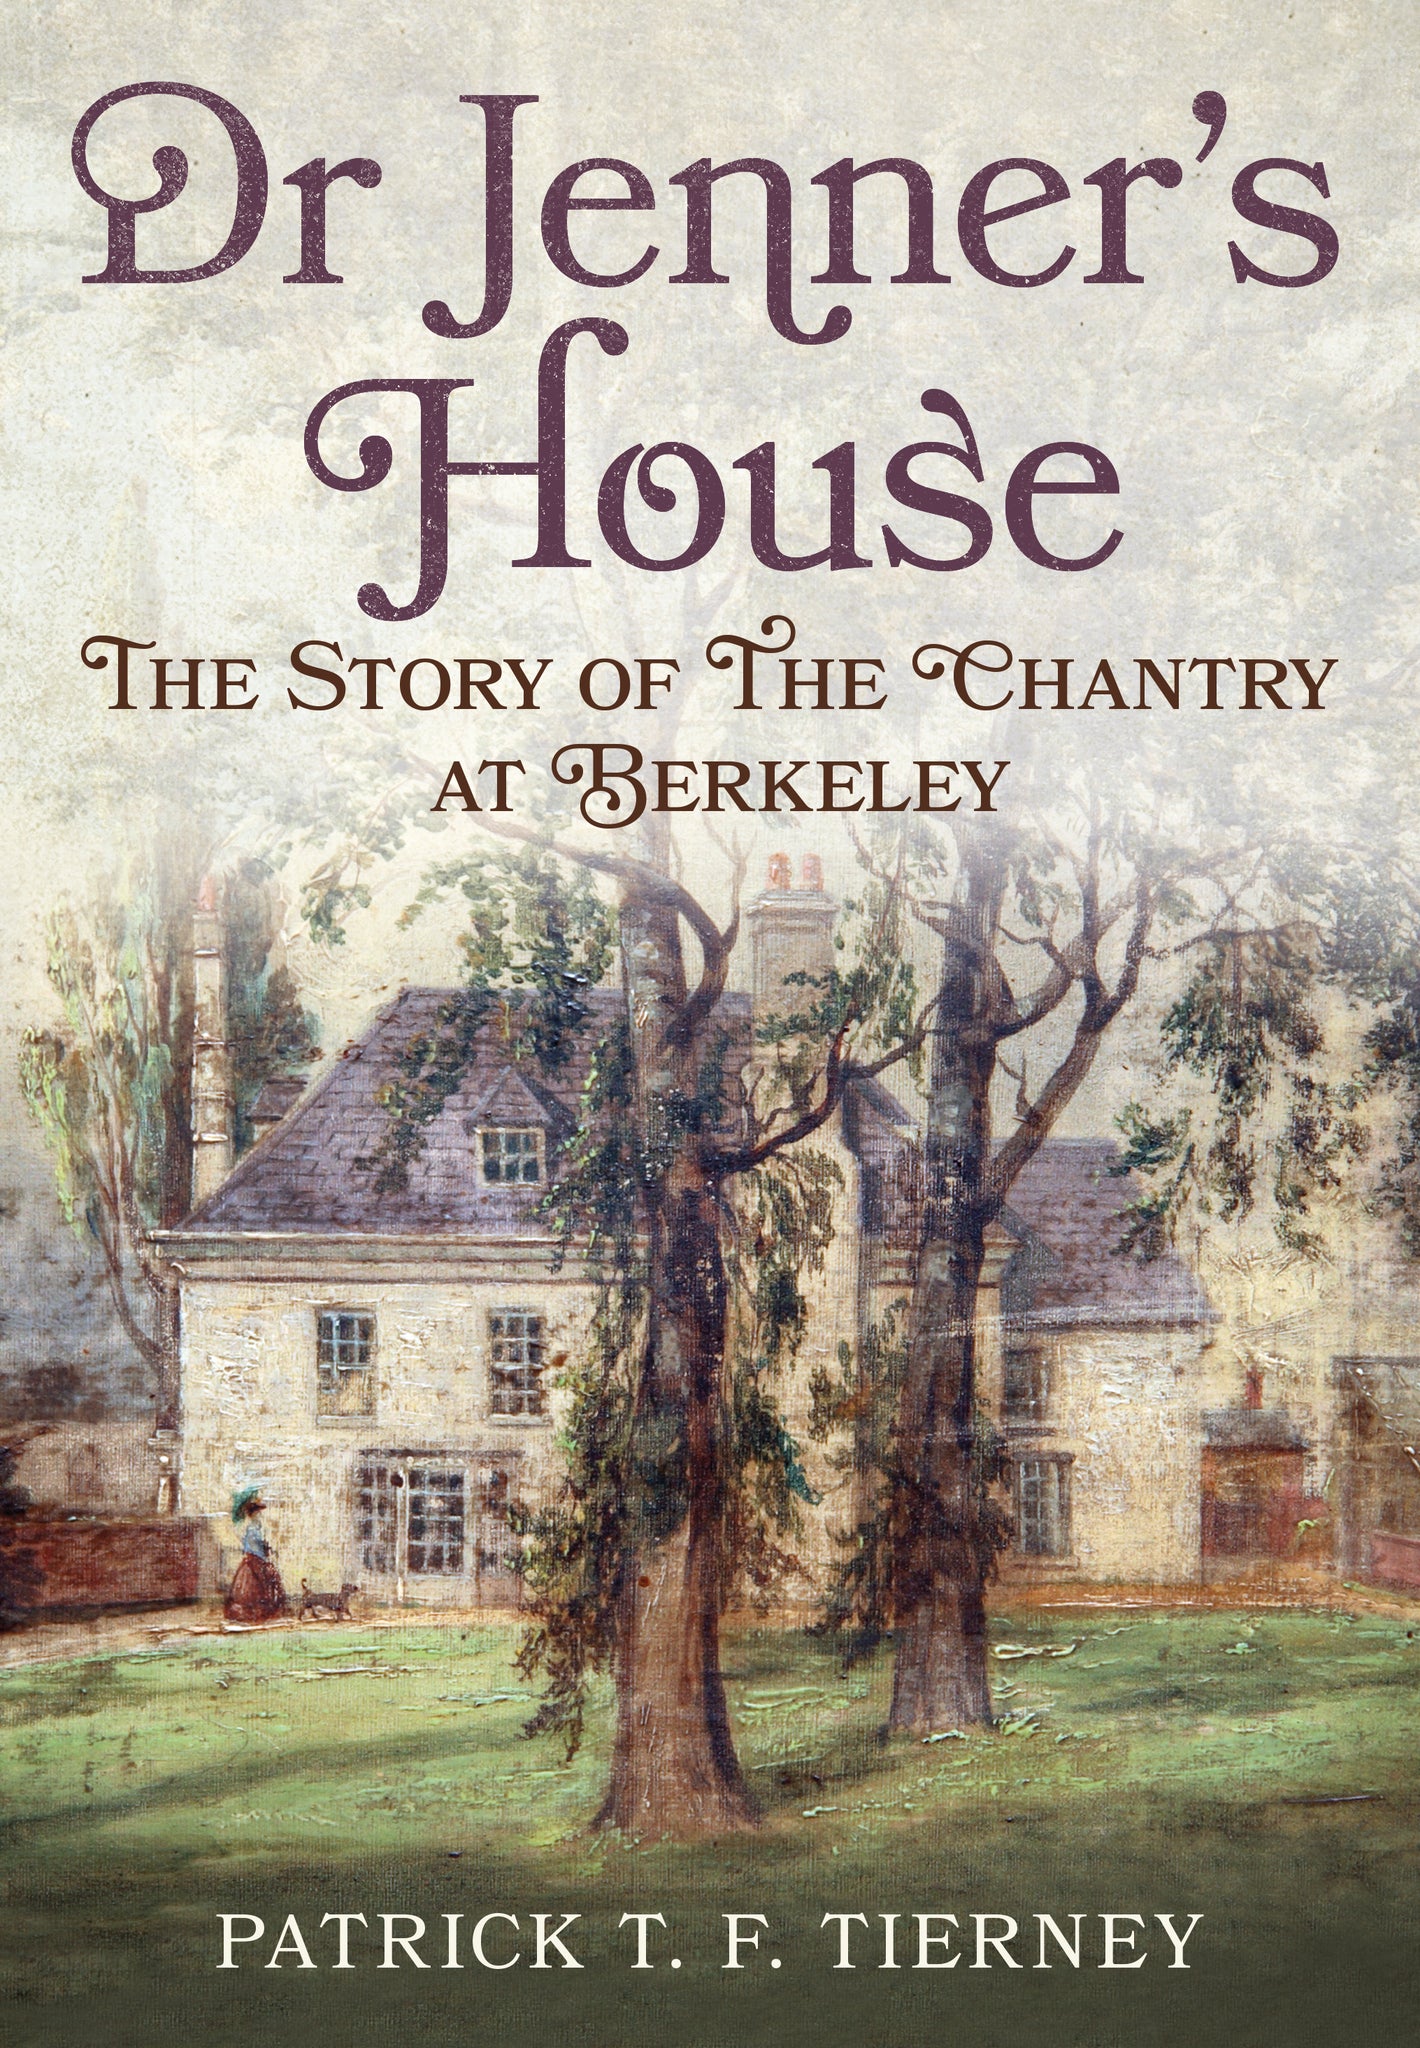 Dr Jenner's House: The Story of The Chantry at Berkeley